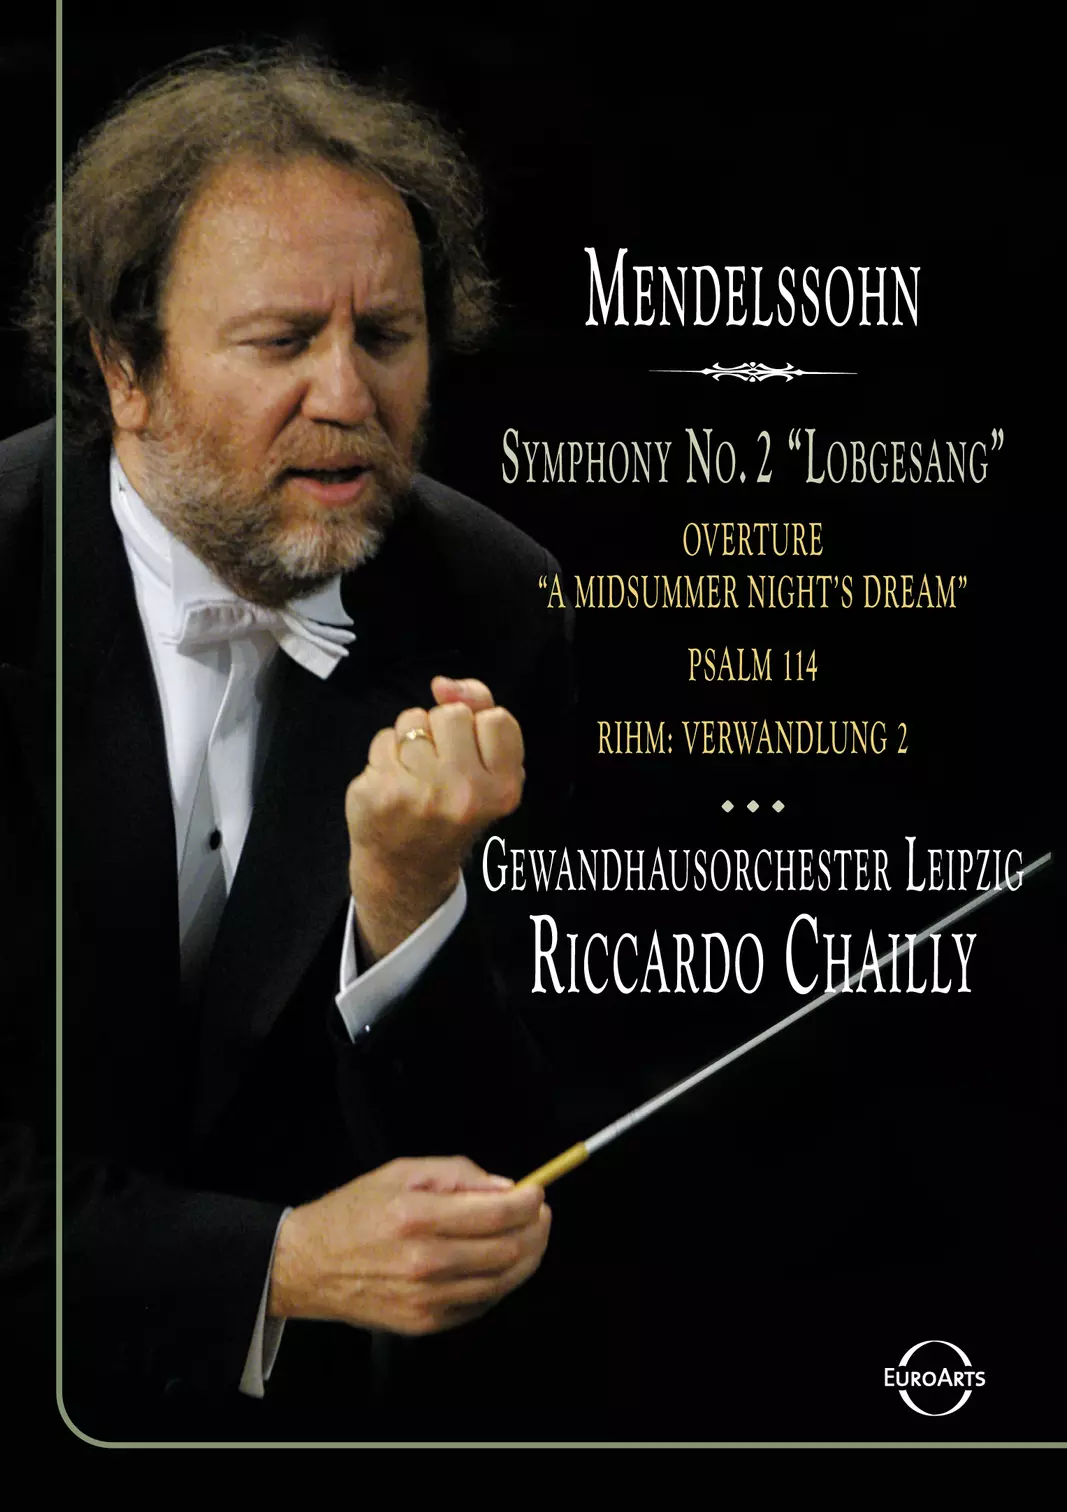 Chailly conducts Mendelssohn